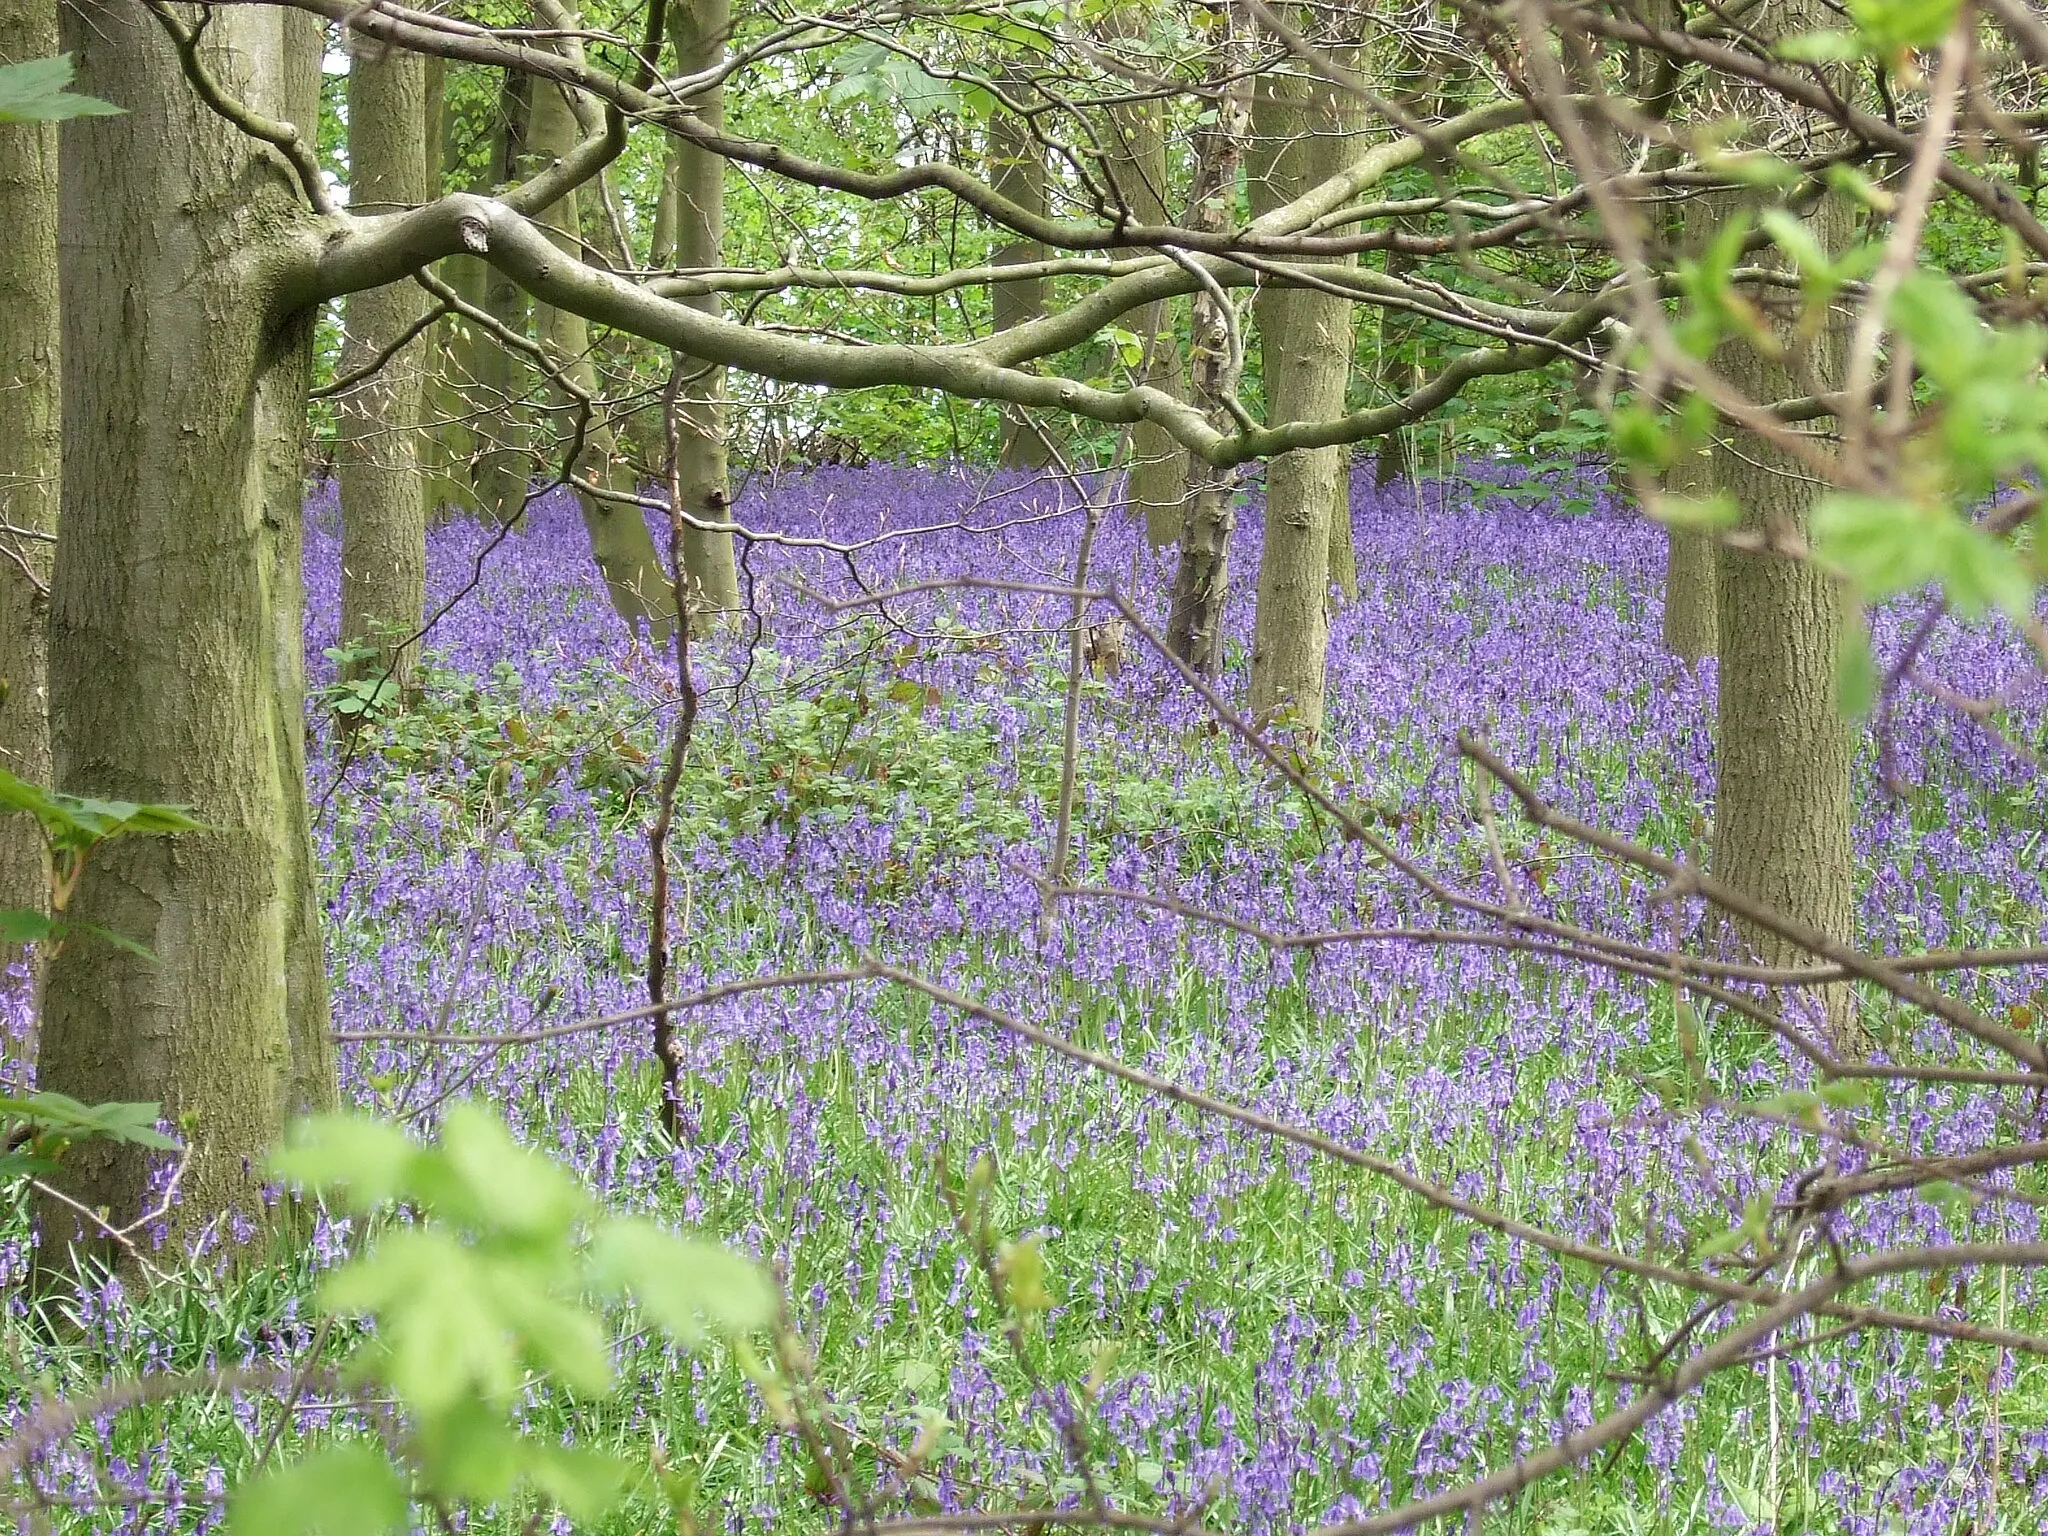 Photo showing: Bluebells in Colonel's Covert, East Leake, South Nottinghamshire, England. coord. 52.81459N 1.18986W